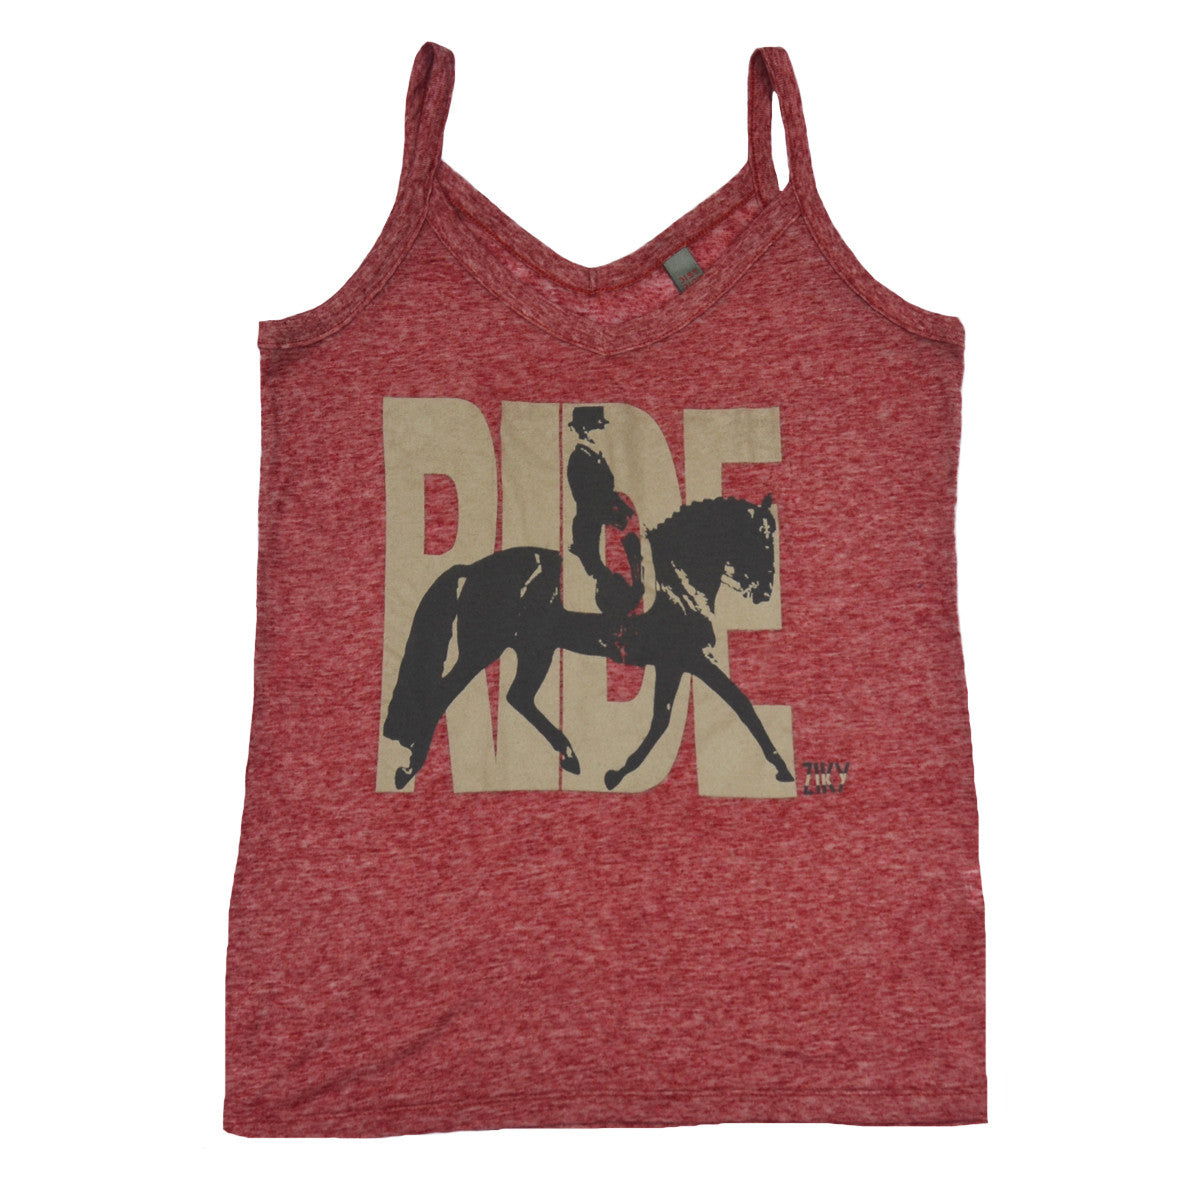 Red dressage "Ride" tank top